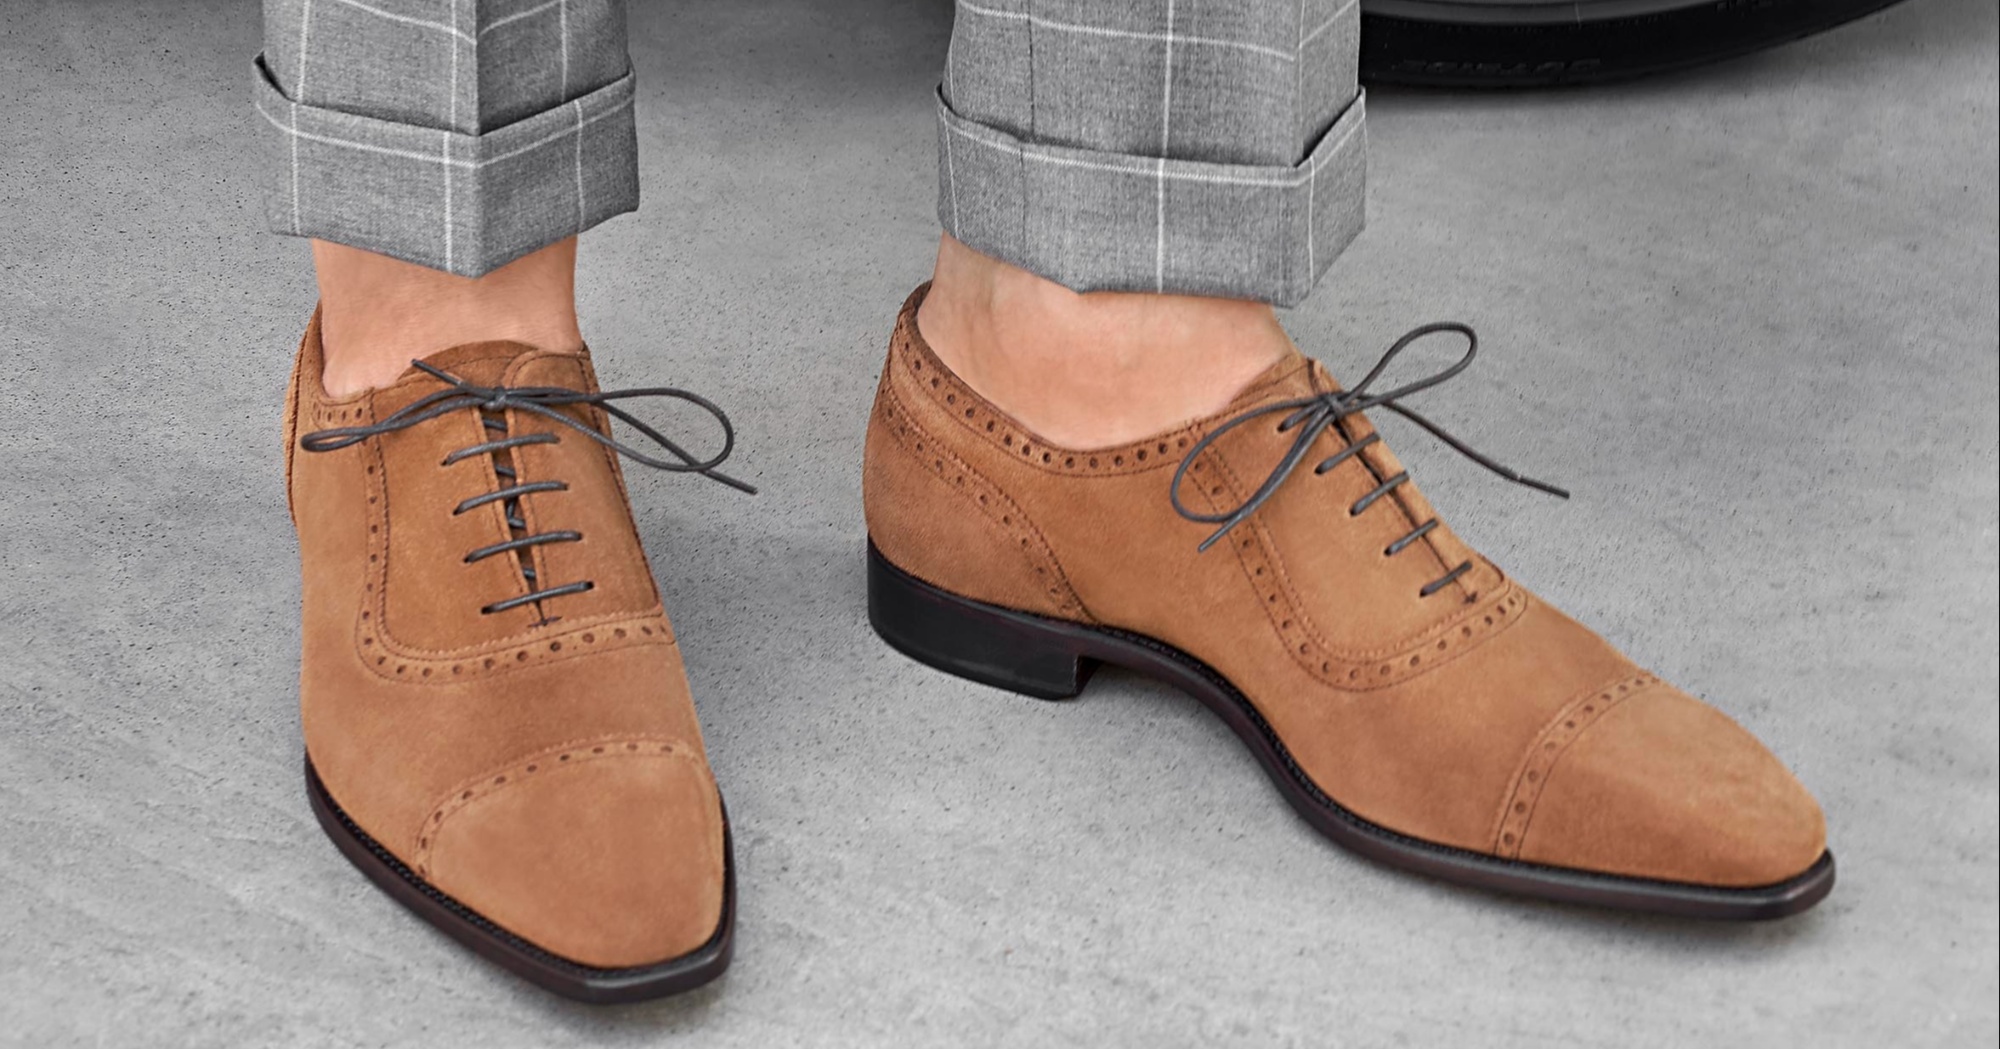 Lace-Up Shoes for Men & Luxury Buckle Shoes